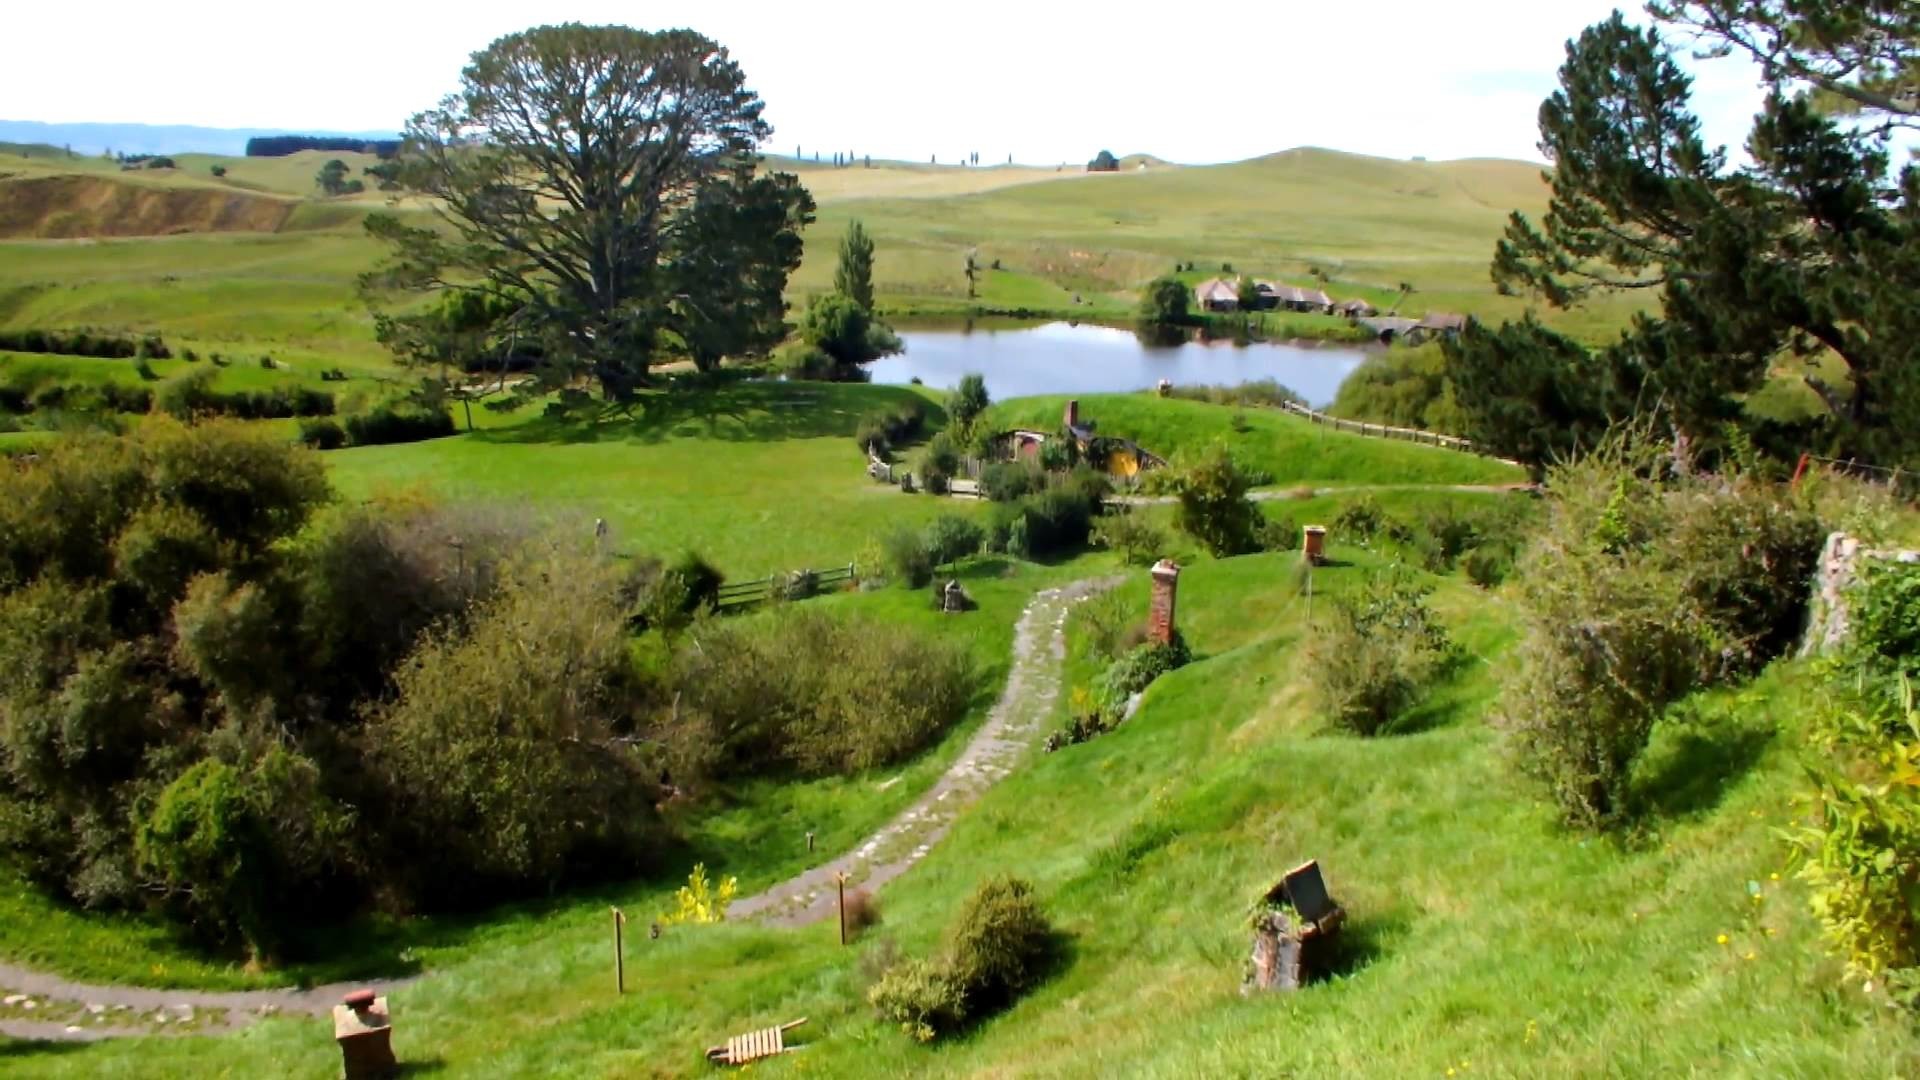 1920x1080 Hobbiton / Hobbingen im Auenland / The Shire in 2012: The Lord of the Rings  + The Hobbit